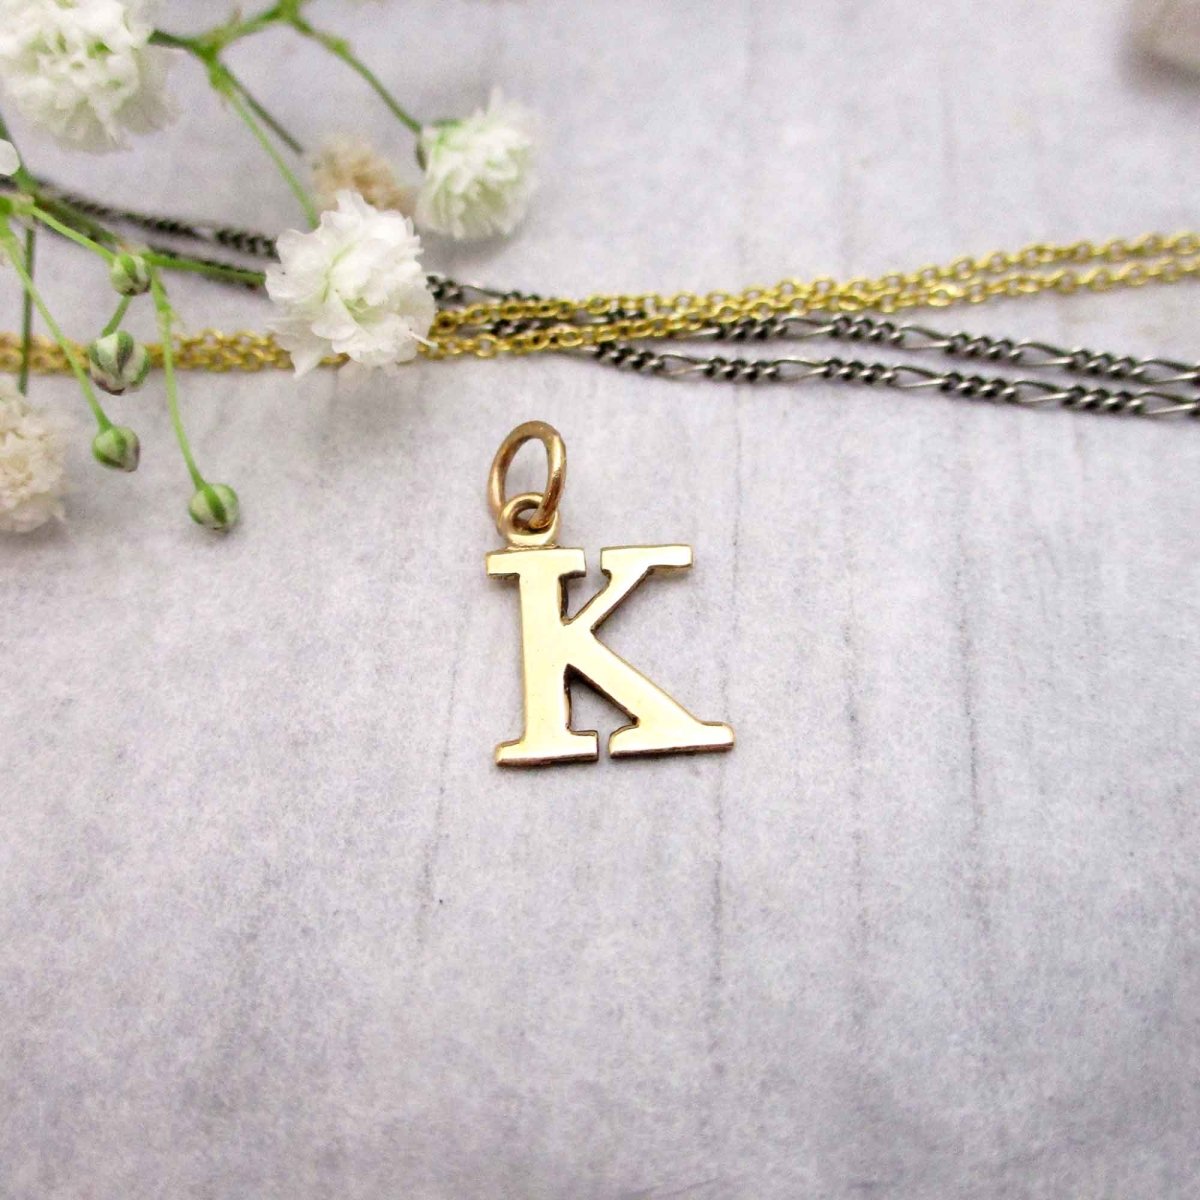 Capital Letter K Initial Charm in 14K Yellow, Rose or White Gold - Luxe Design Jewellery